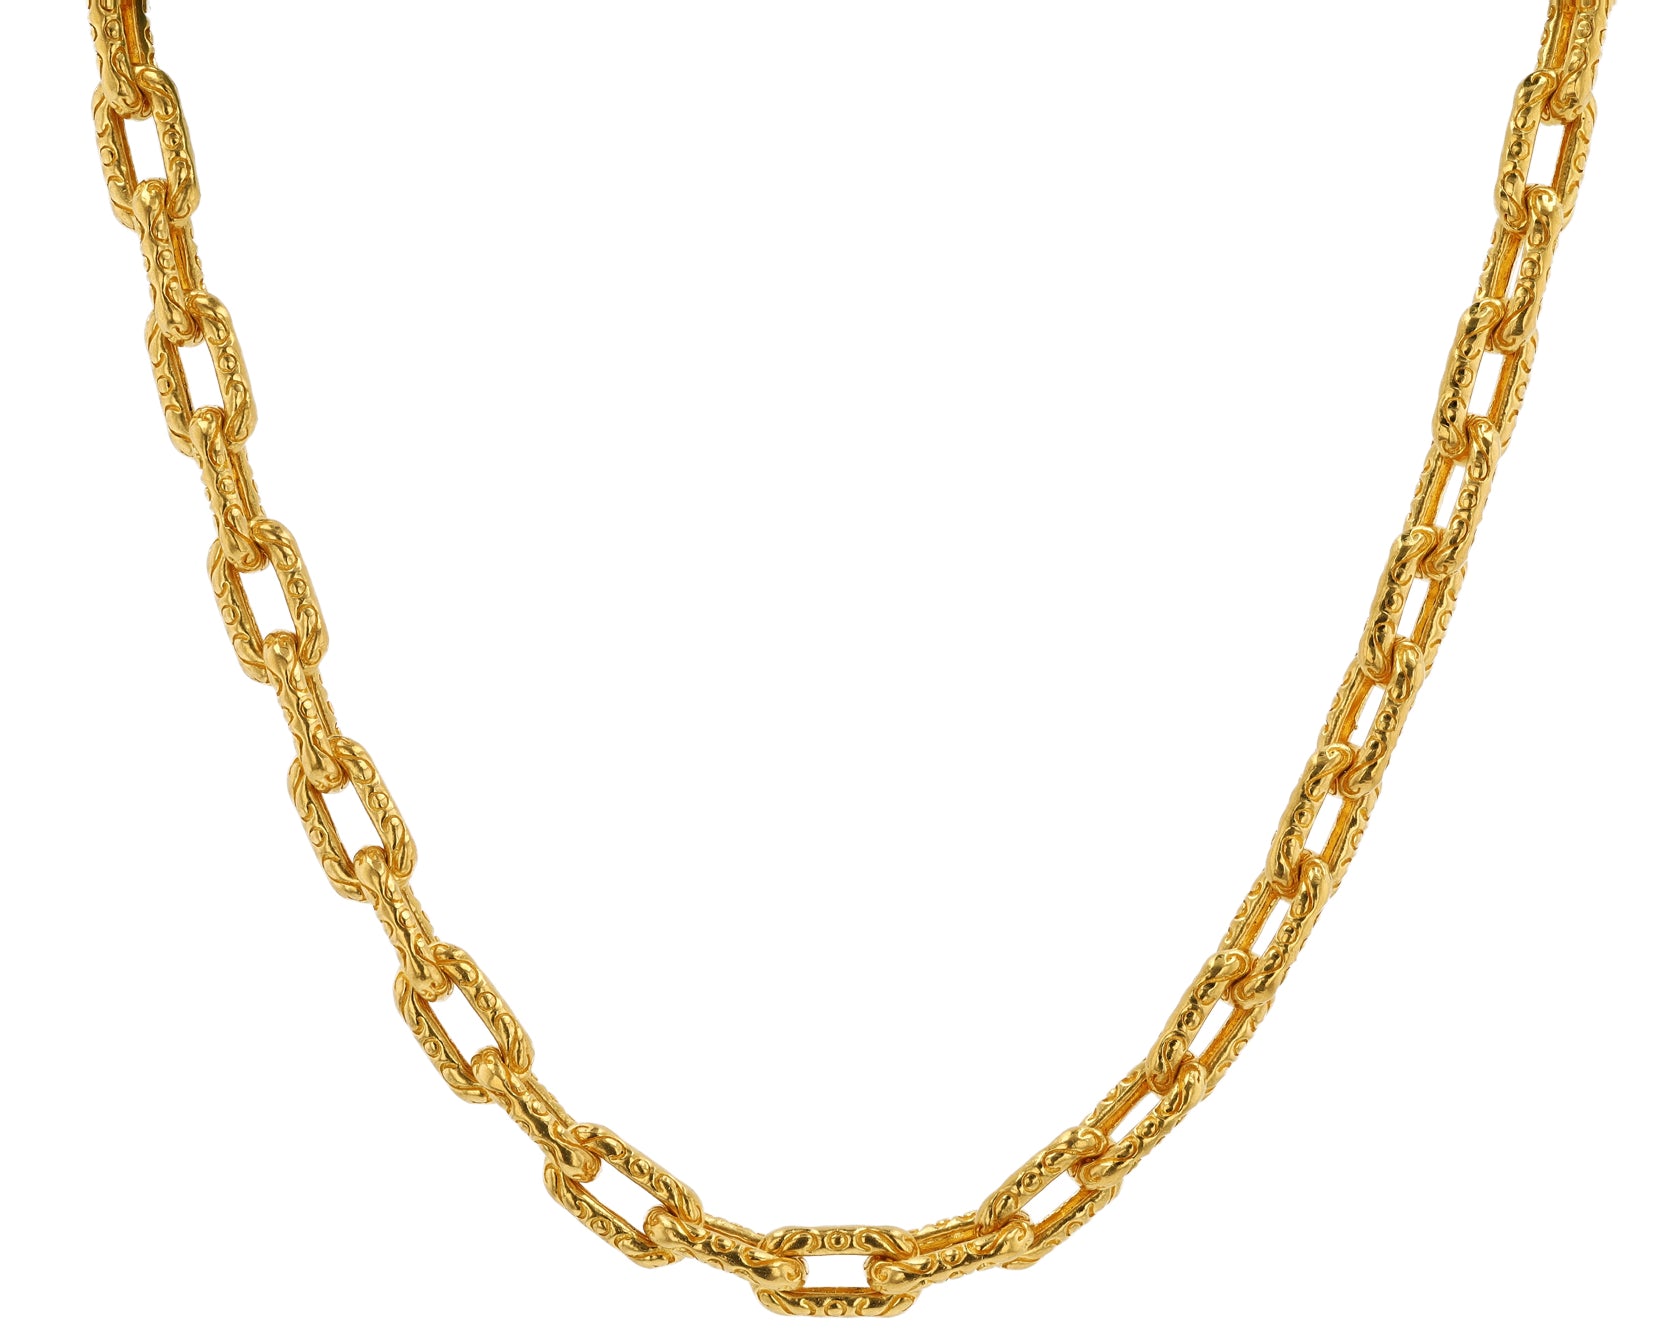 Heavy 24K Gold Engraved Chain Link Necklace